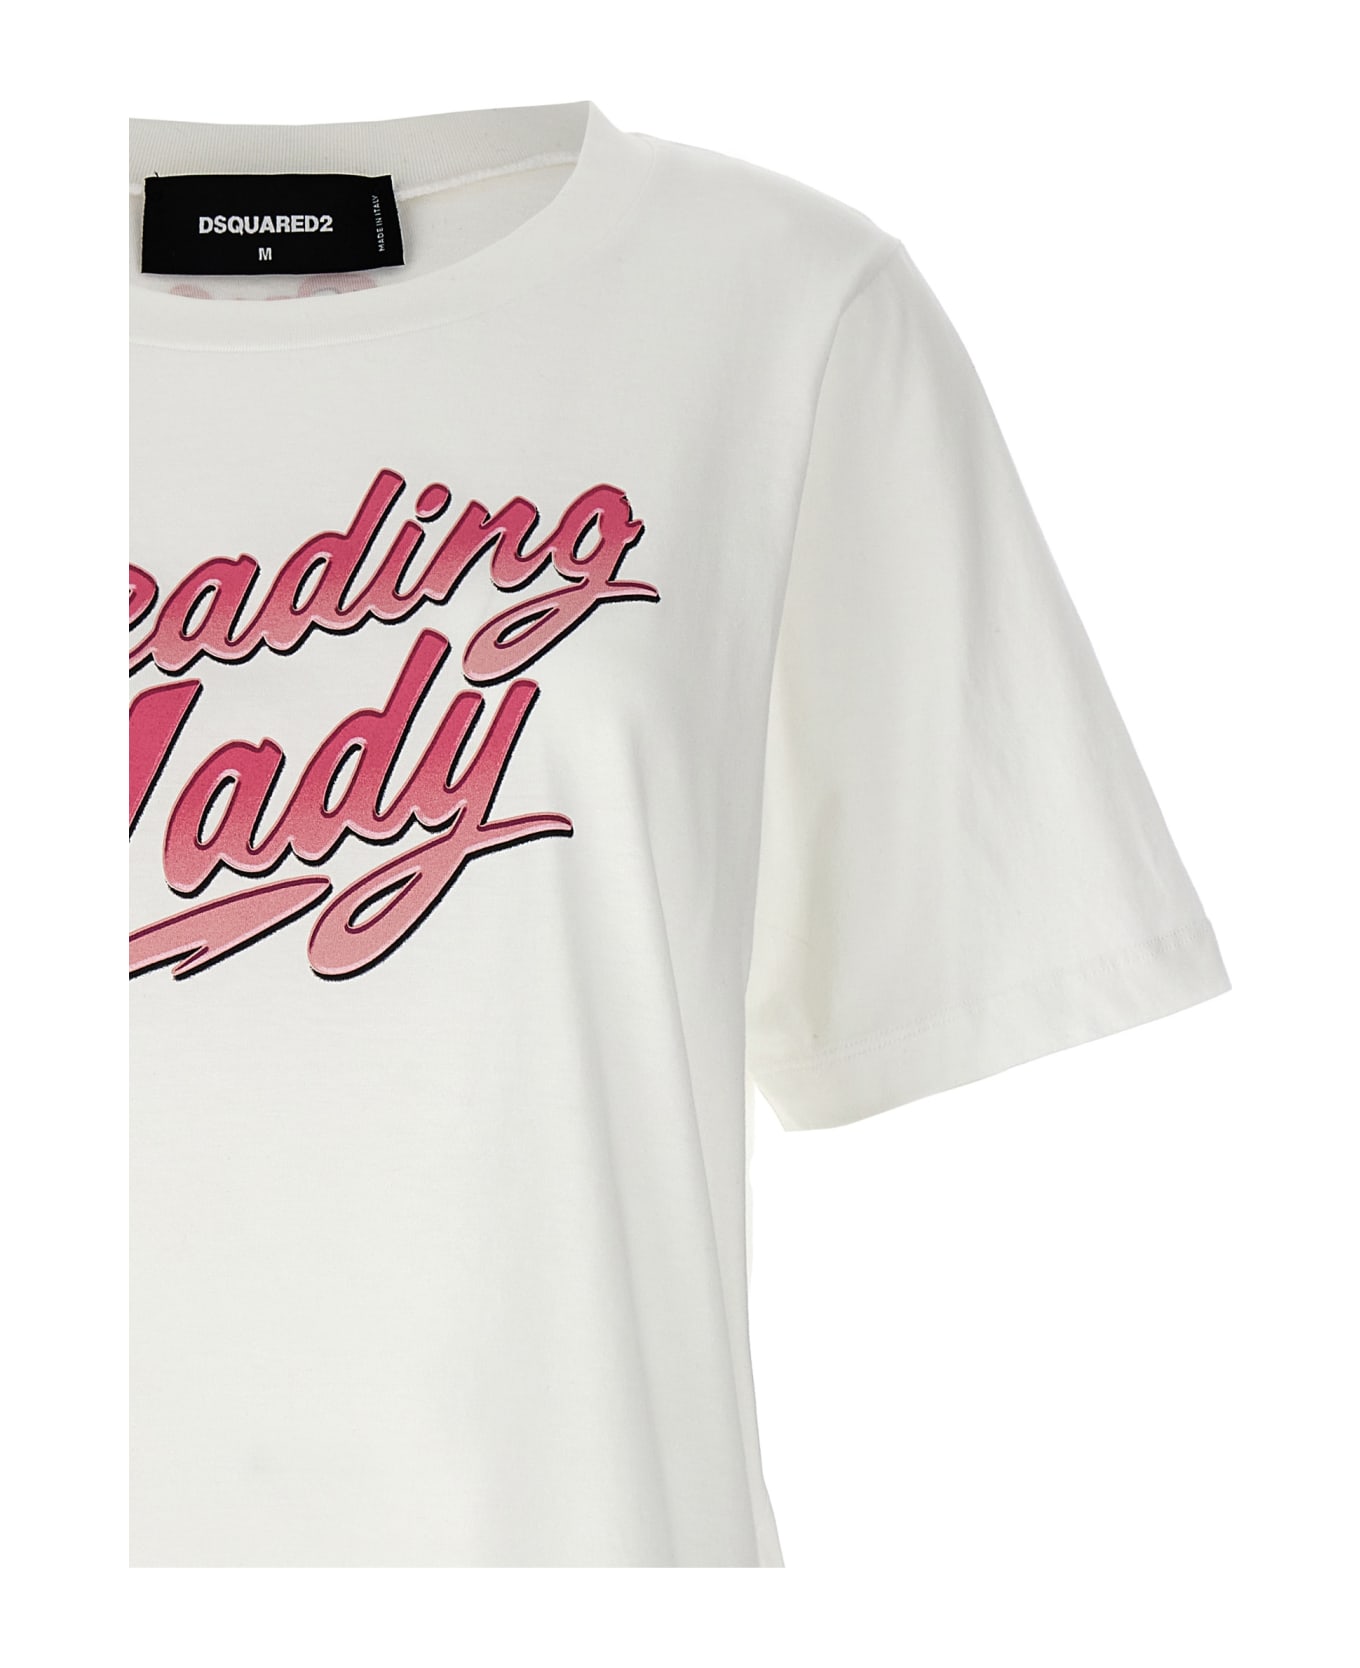 Dsquared2 'leading Lady' T-shirt - White Tシャツ